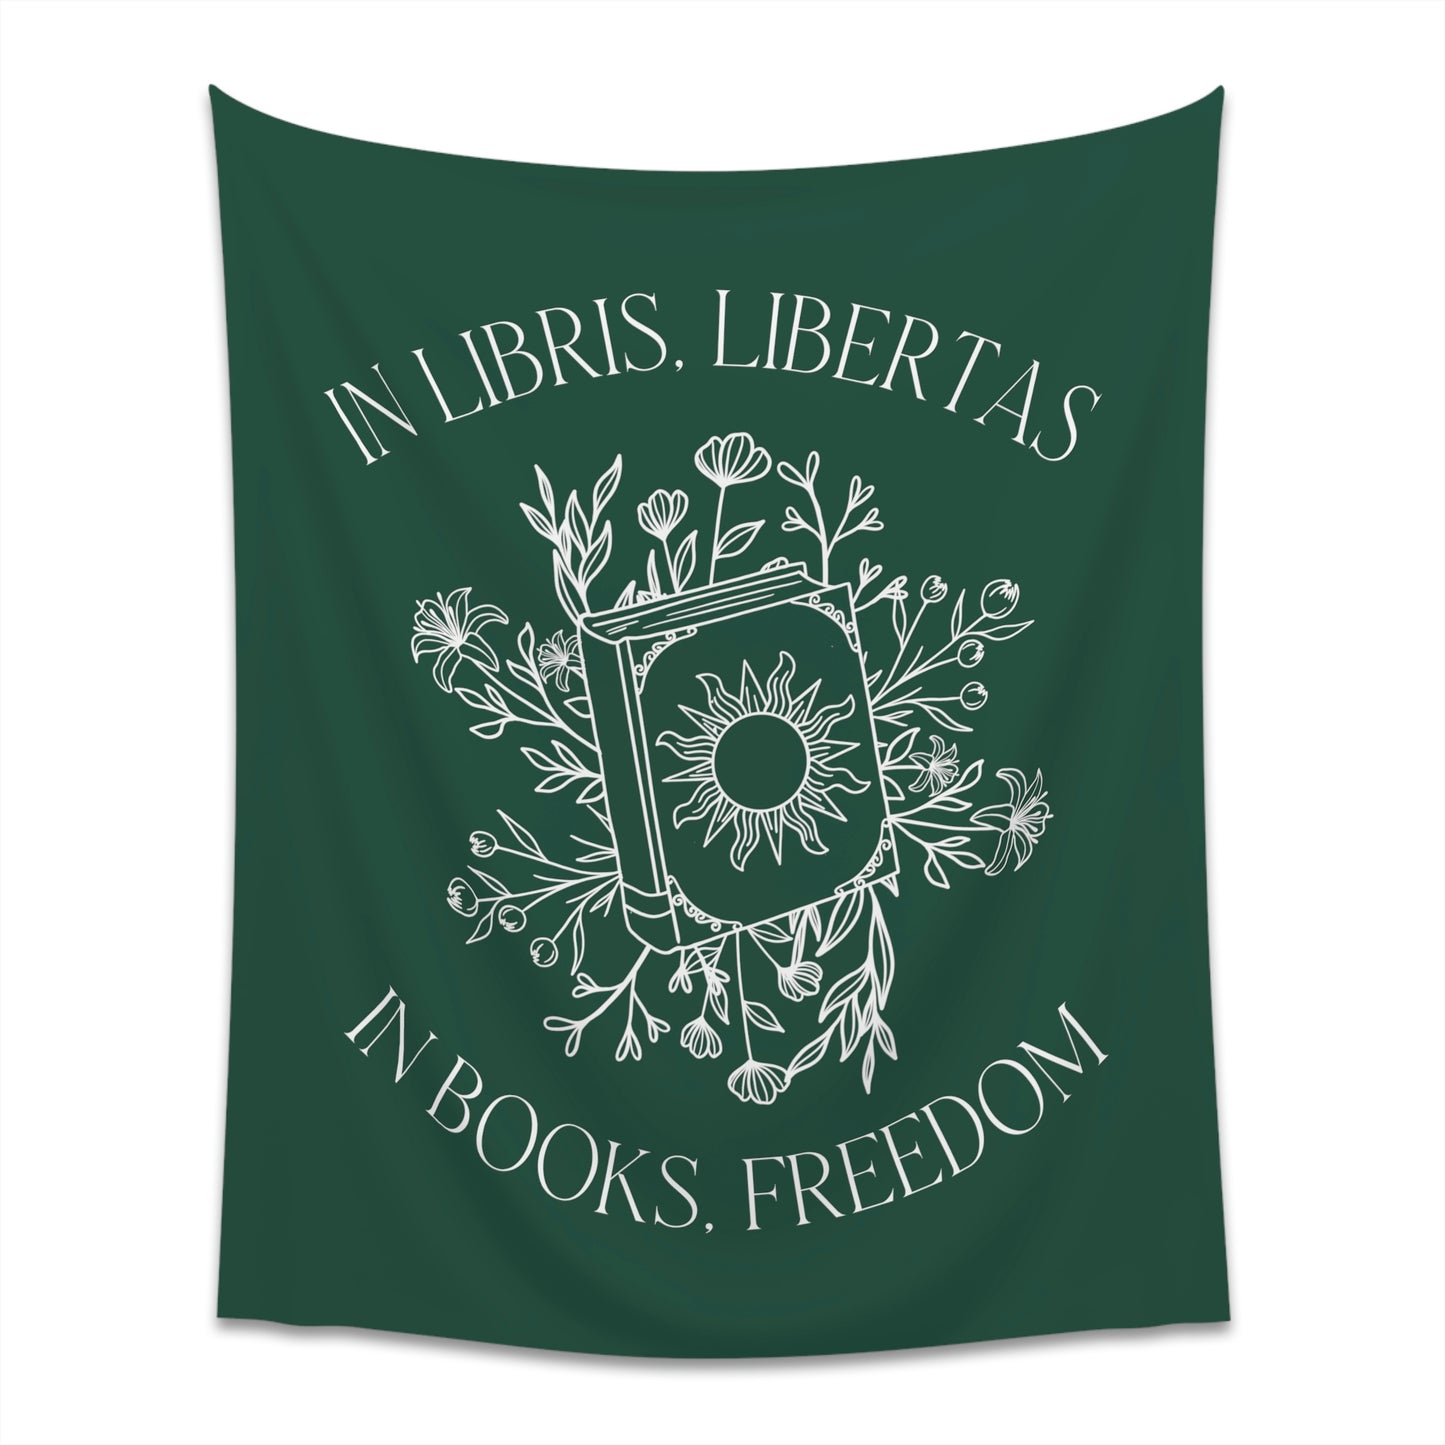 In Books, Freedom Wall Tapestry